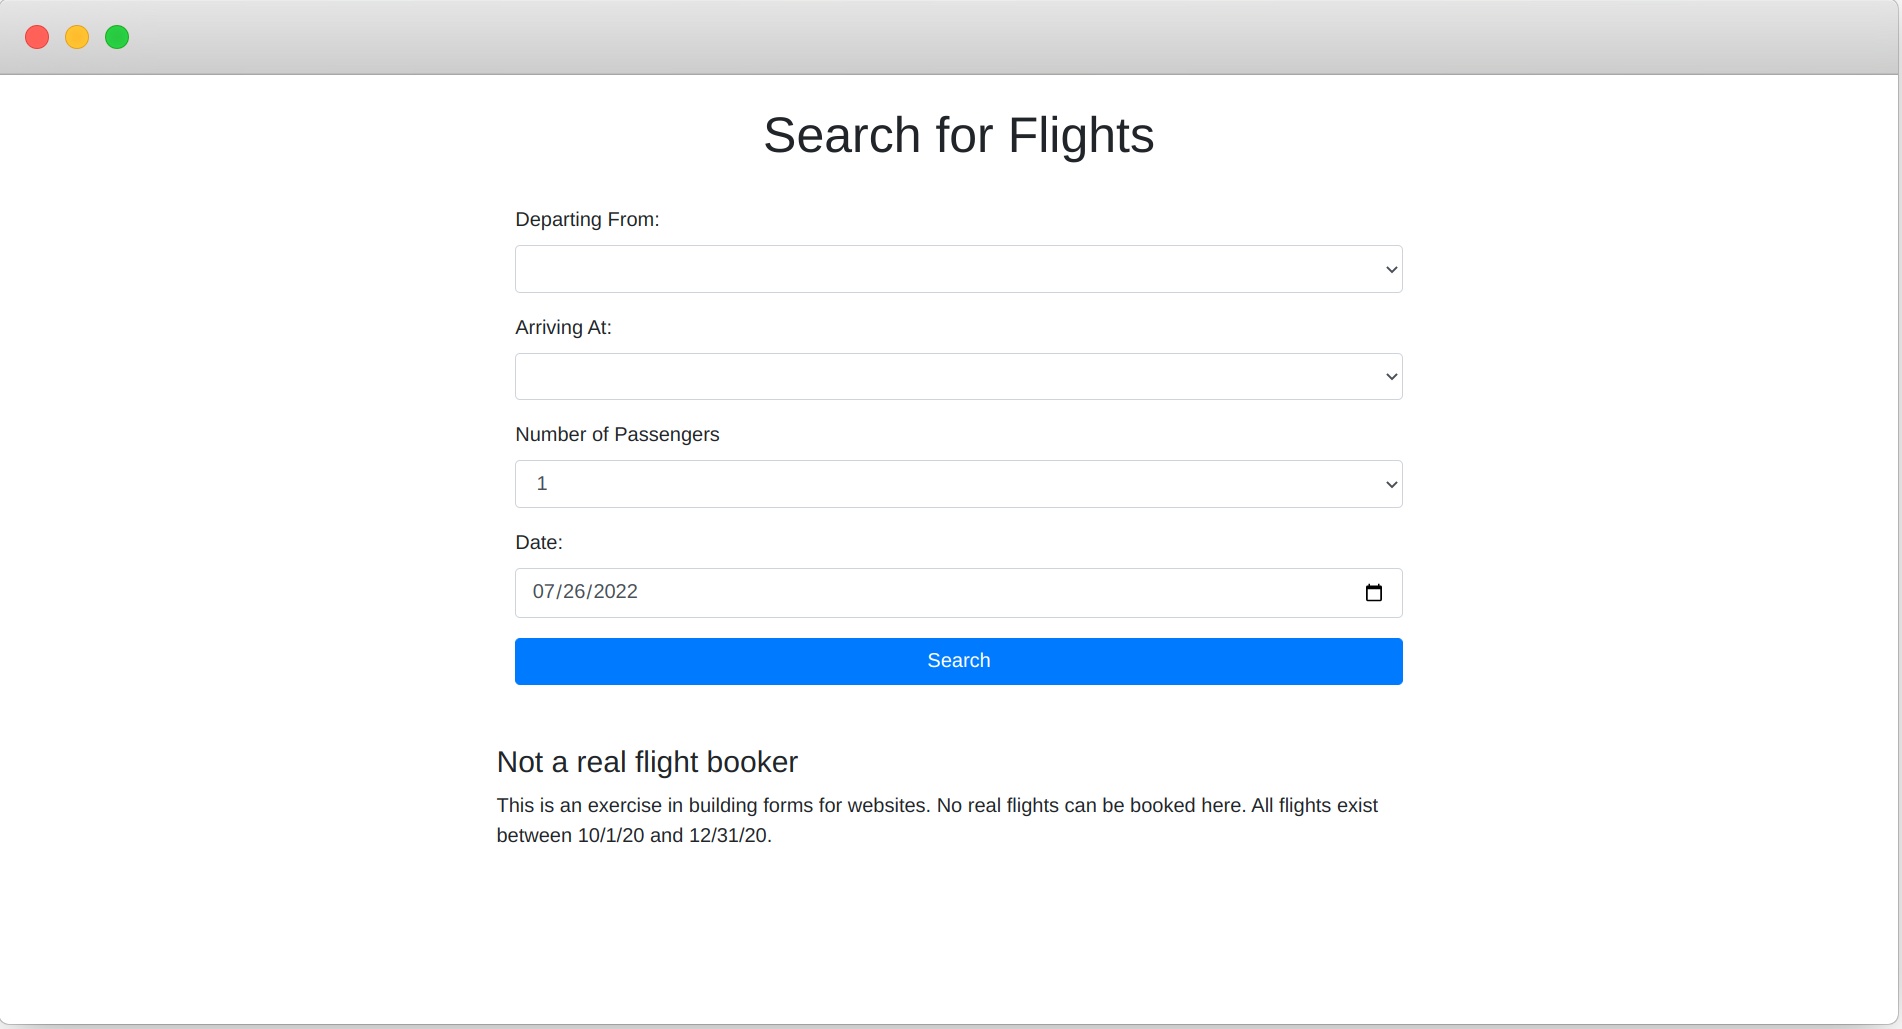 this is an image of the flightbooker app